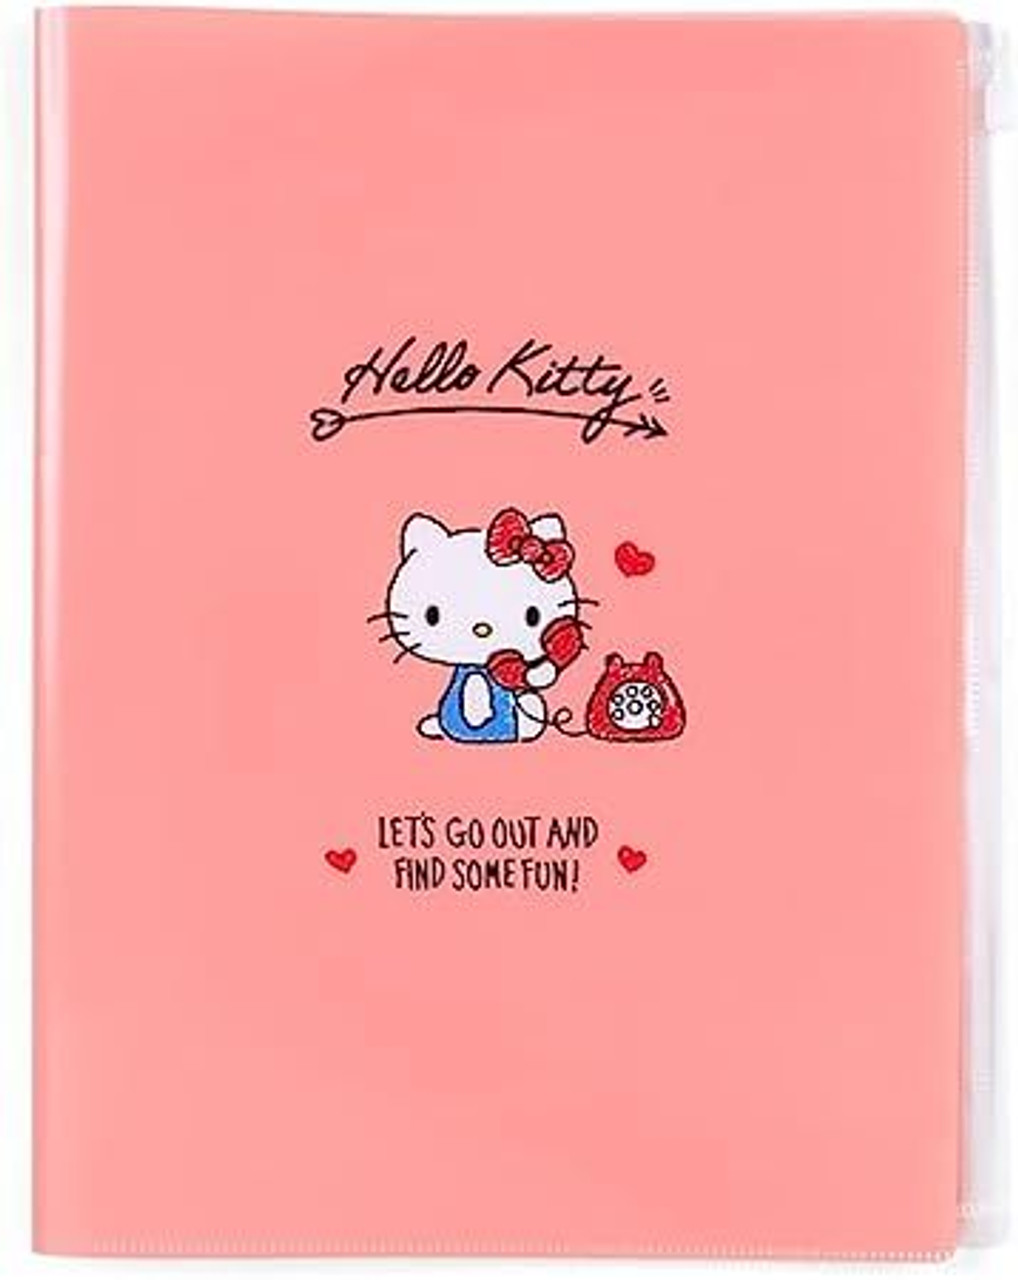 https://www.cyrenanime.com/storage/product-photos/85/hello-kitty-plastic-folder-with-pockets-clear-file-a4-size-sanrio-stationery.jpg